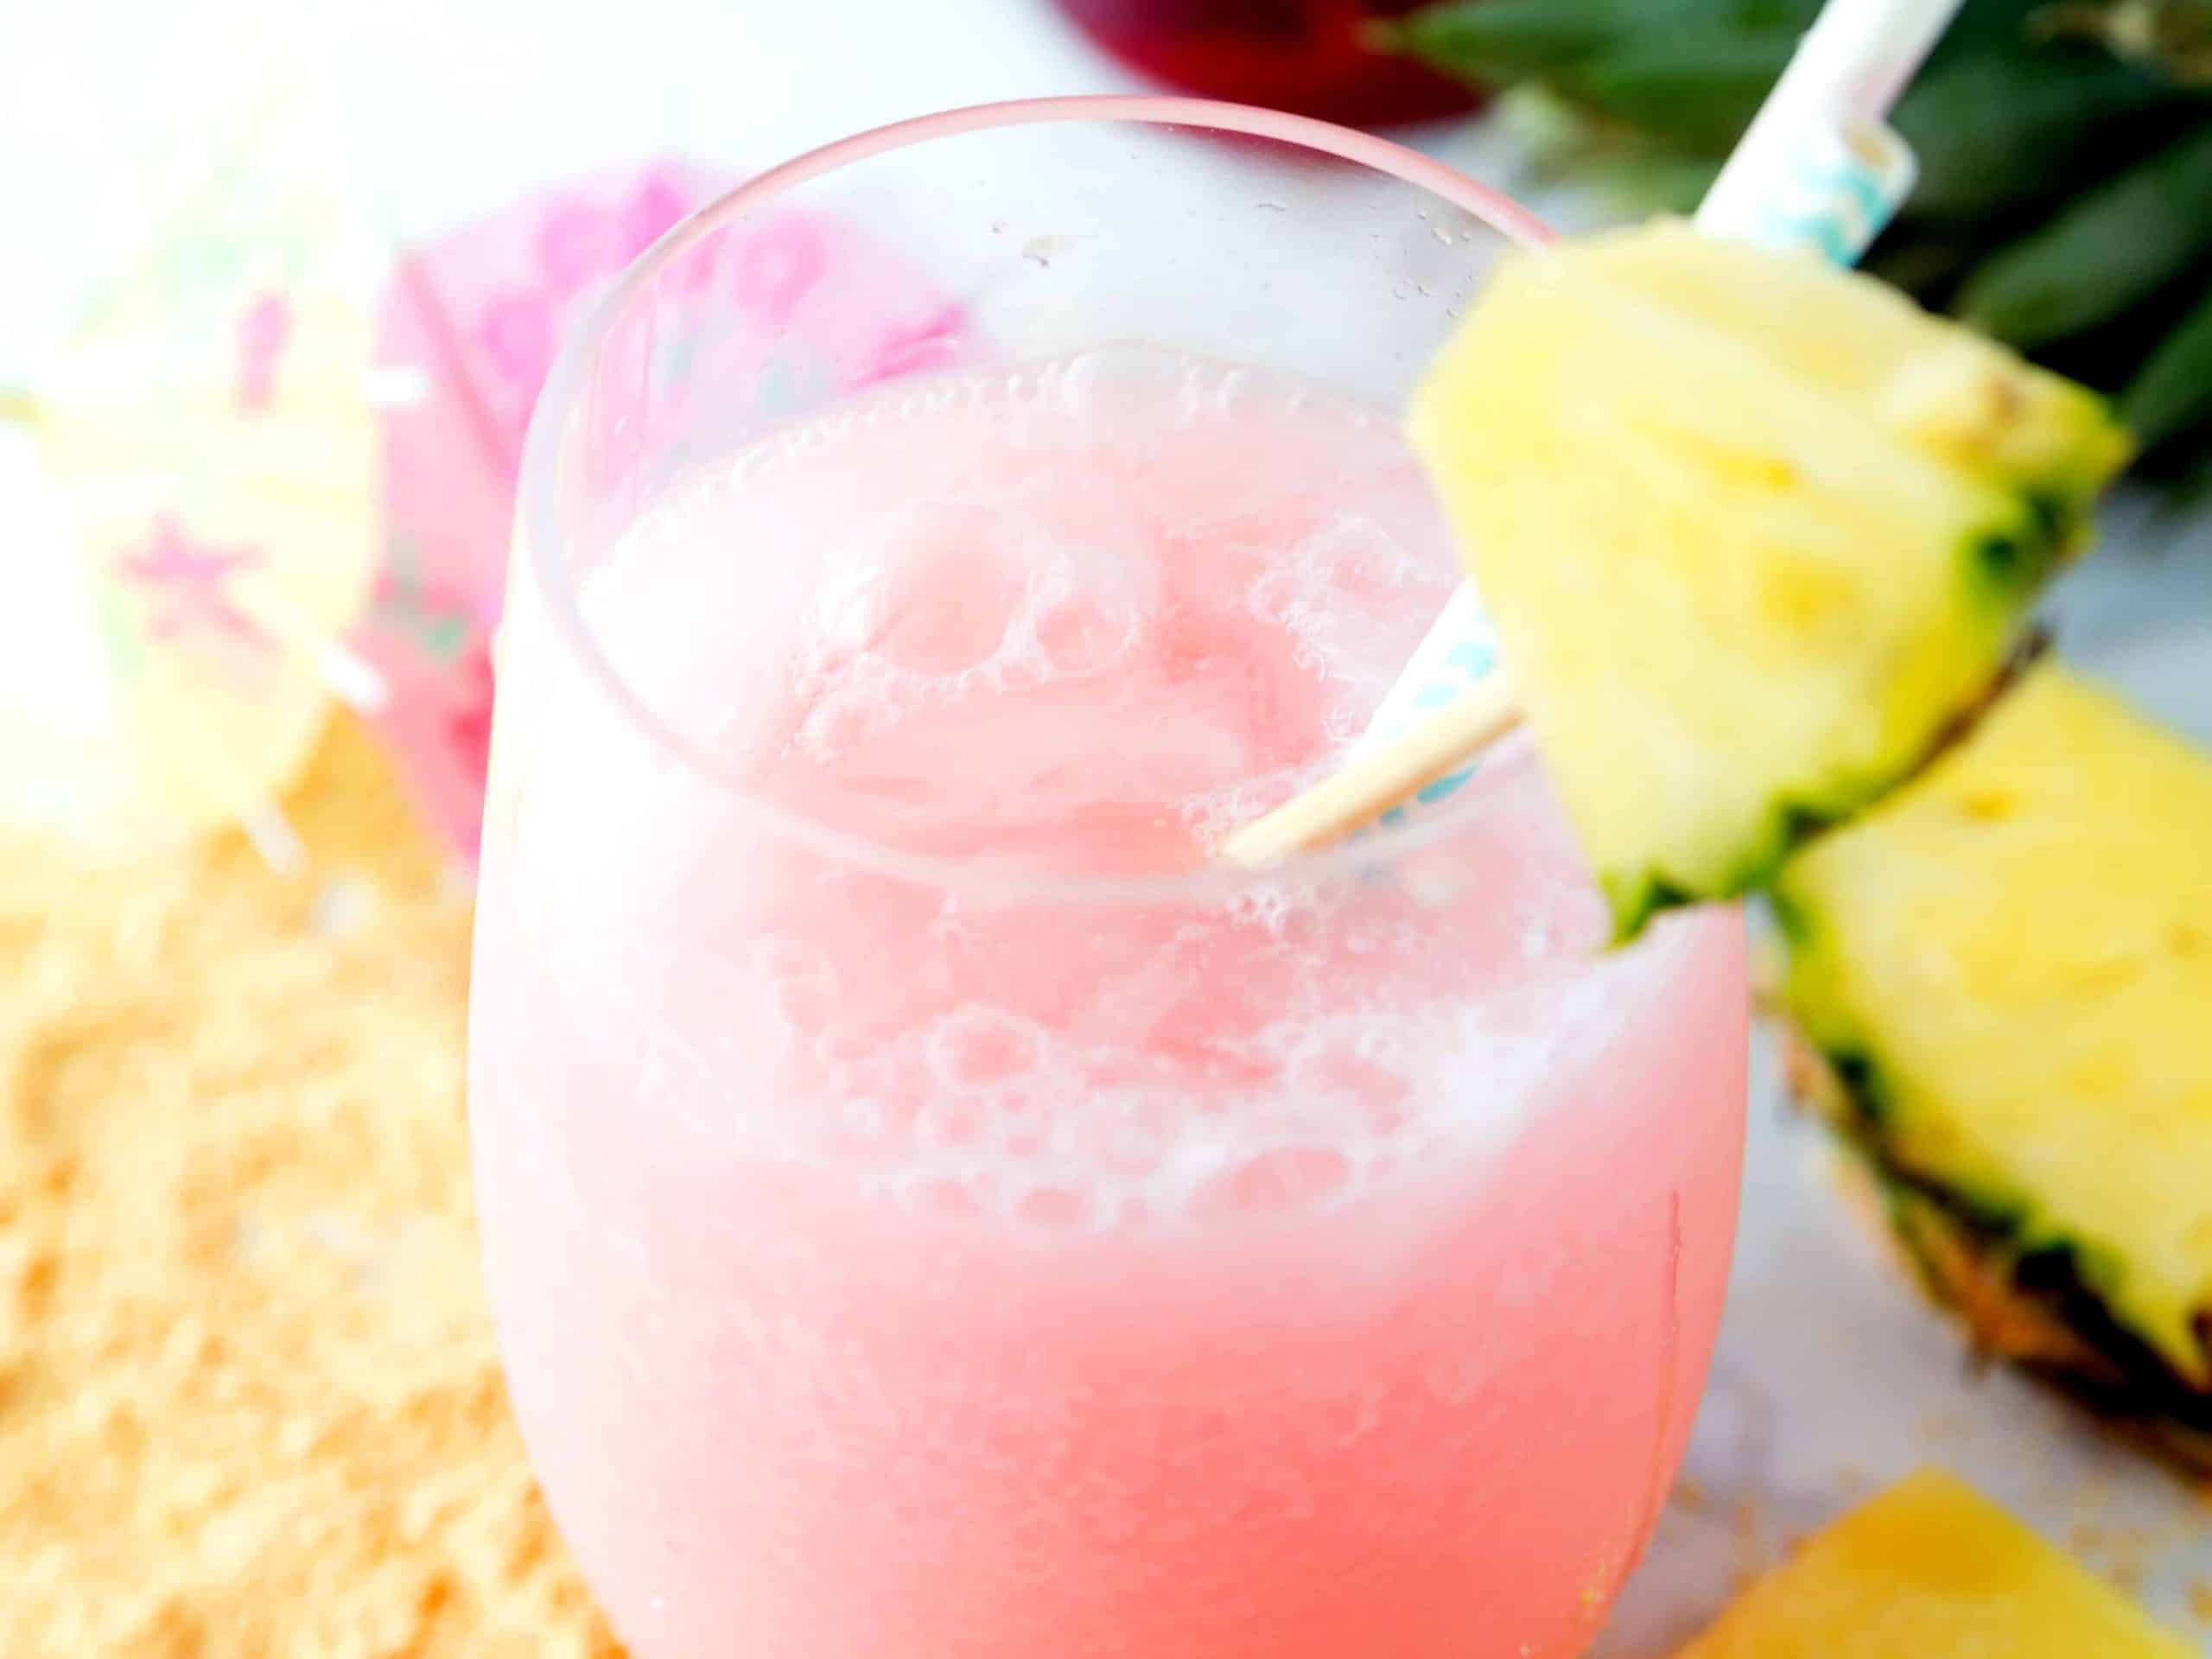 https://www.southernplate.com/wp-content/uploads/2017/06/thumbnail-Tropical-Pink-Drink-Hero-2-scaled.jpg